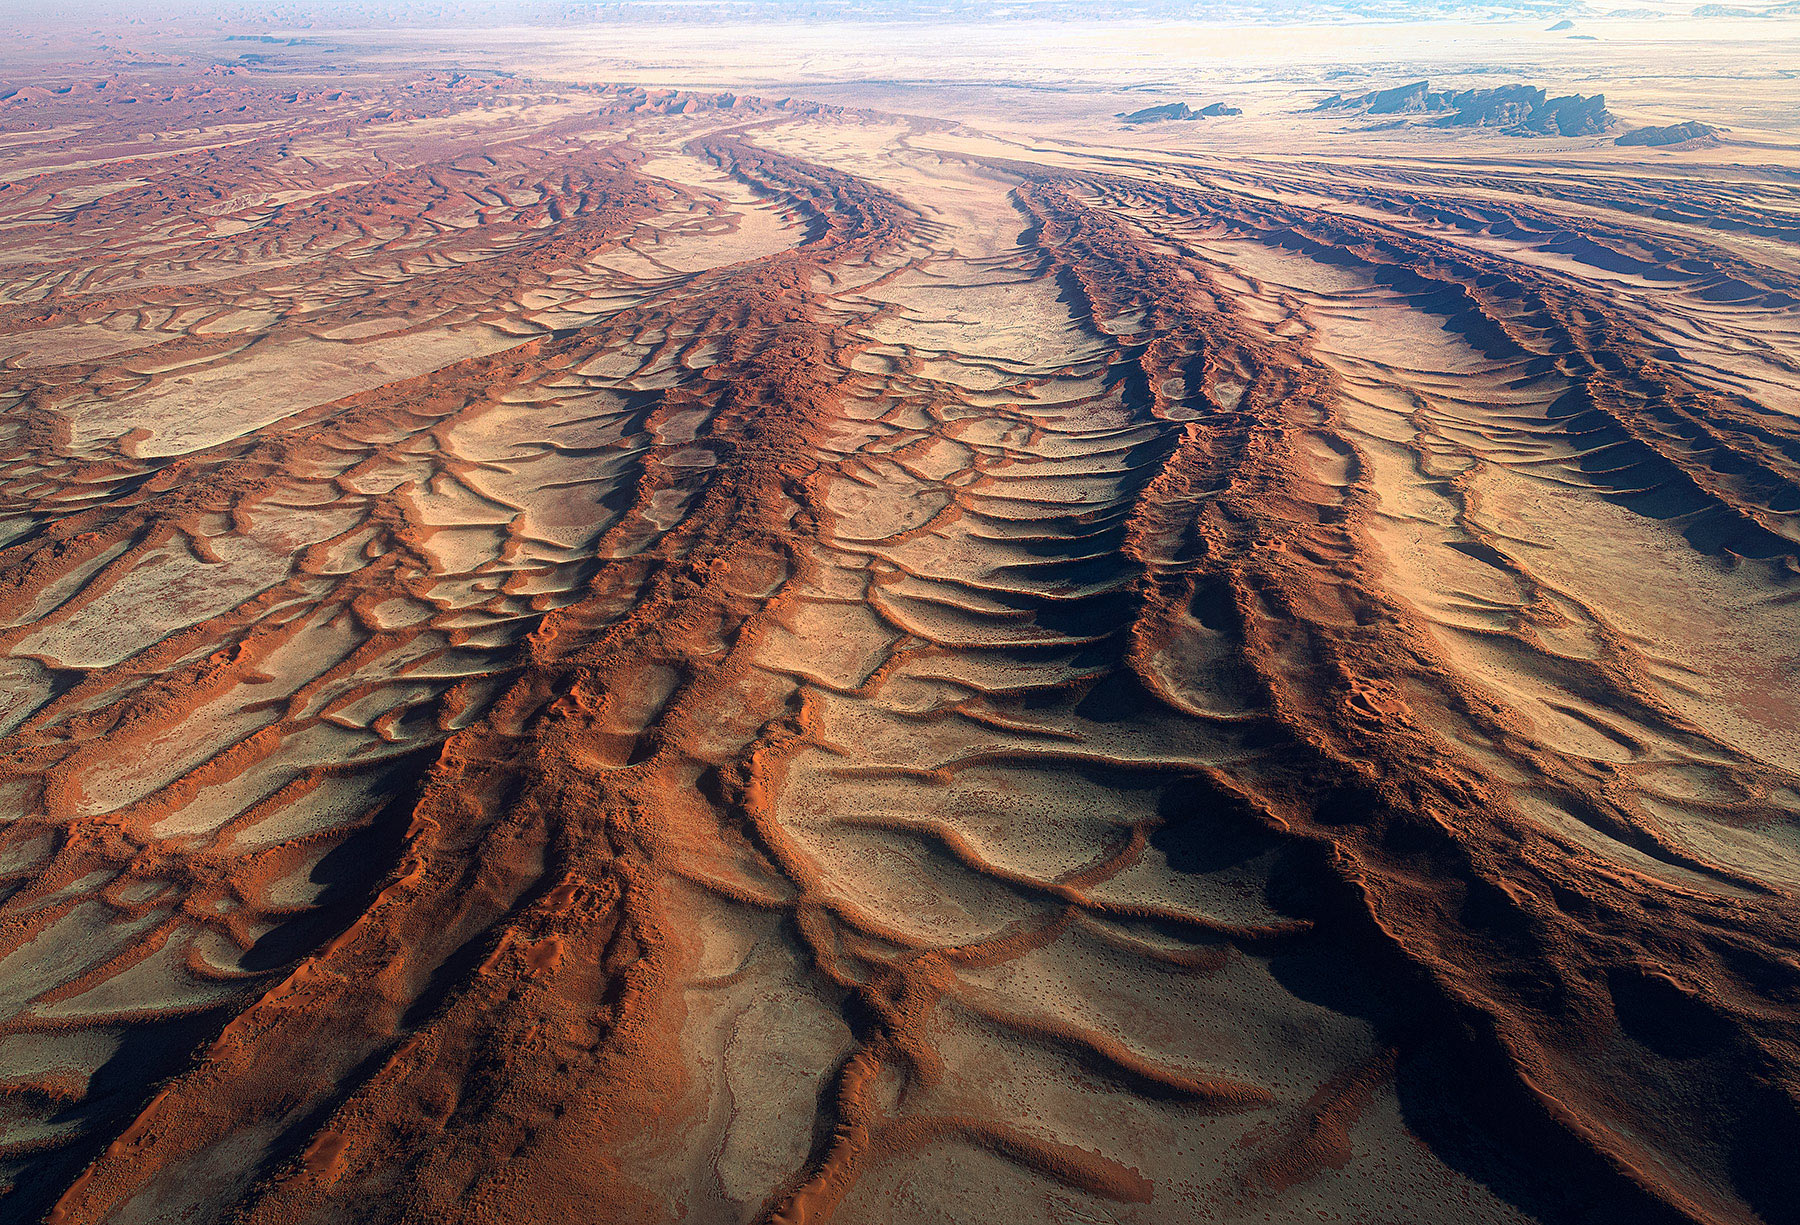 Layers of red sands and grasslands combine for unusual patterns reaching into the Namibian Desert